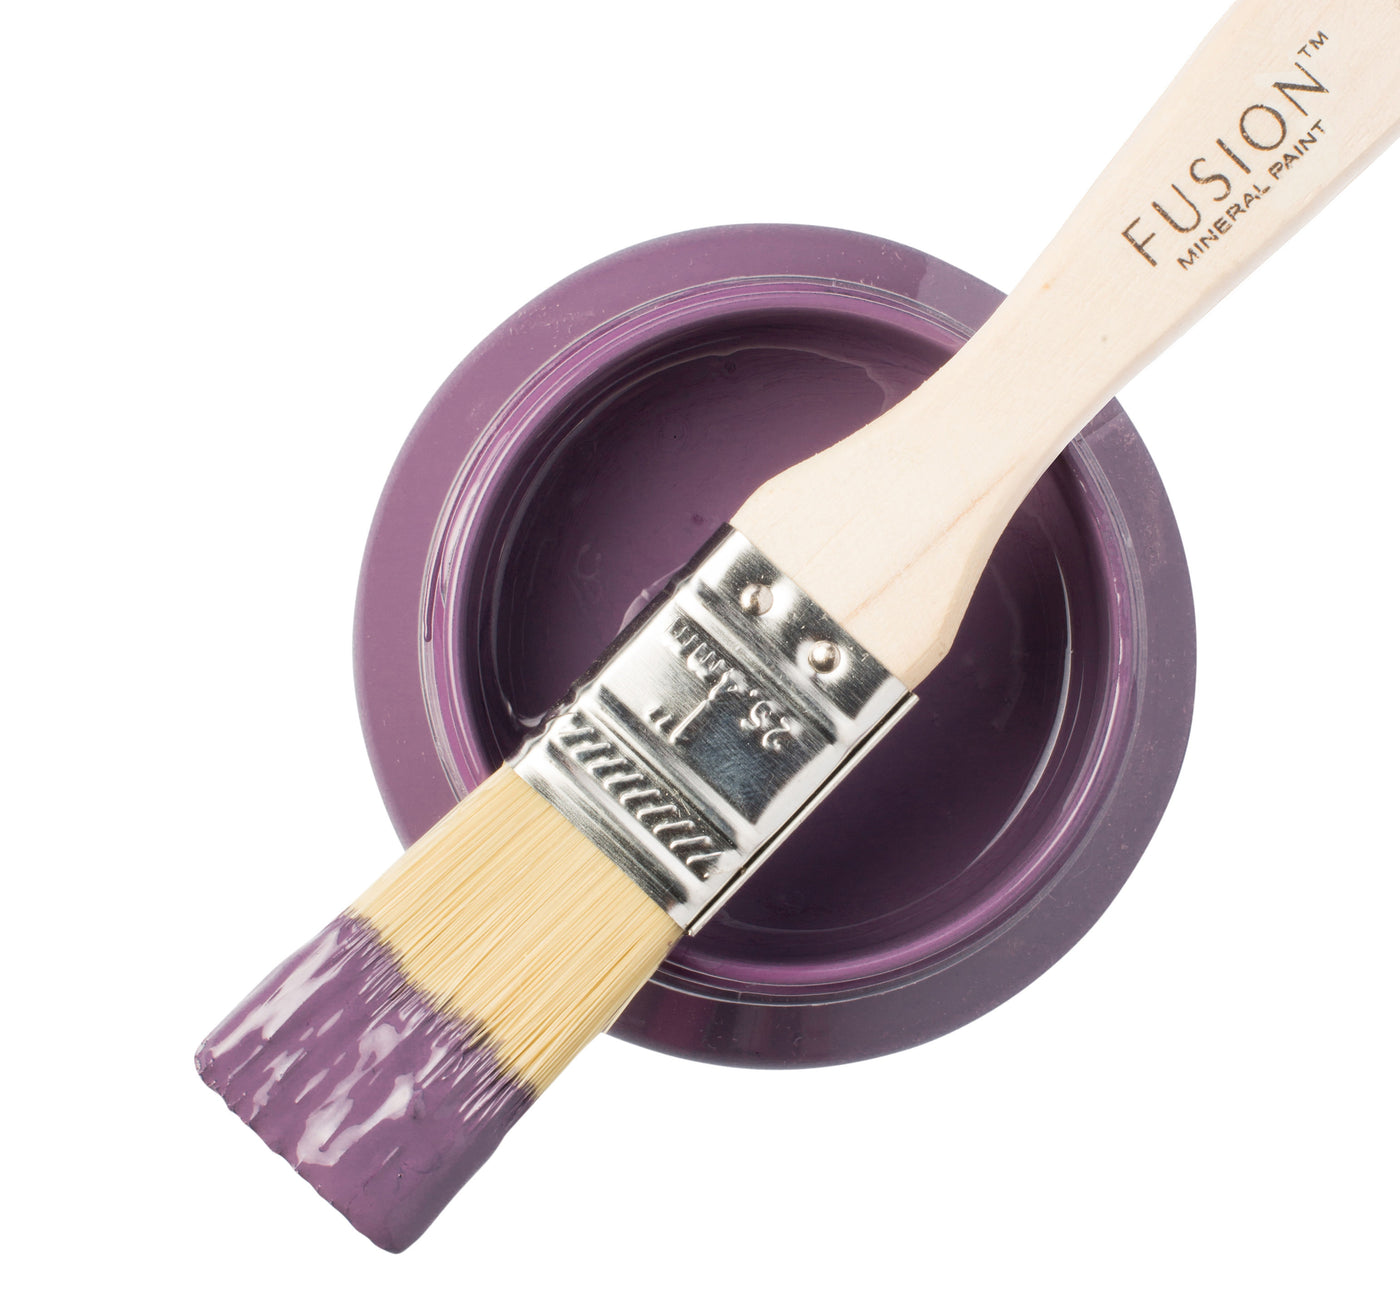 Deep purple paint can and brush from Fusion Mineral Paint